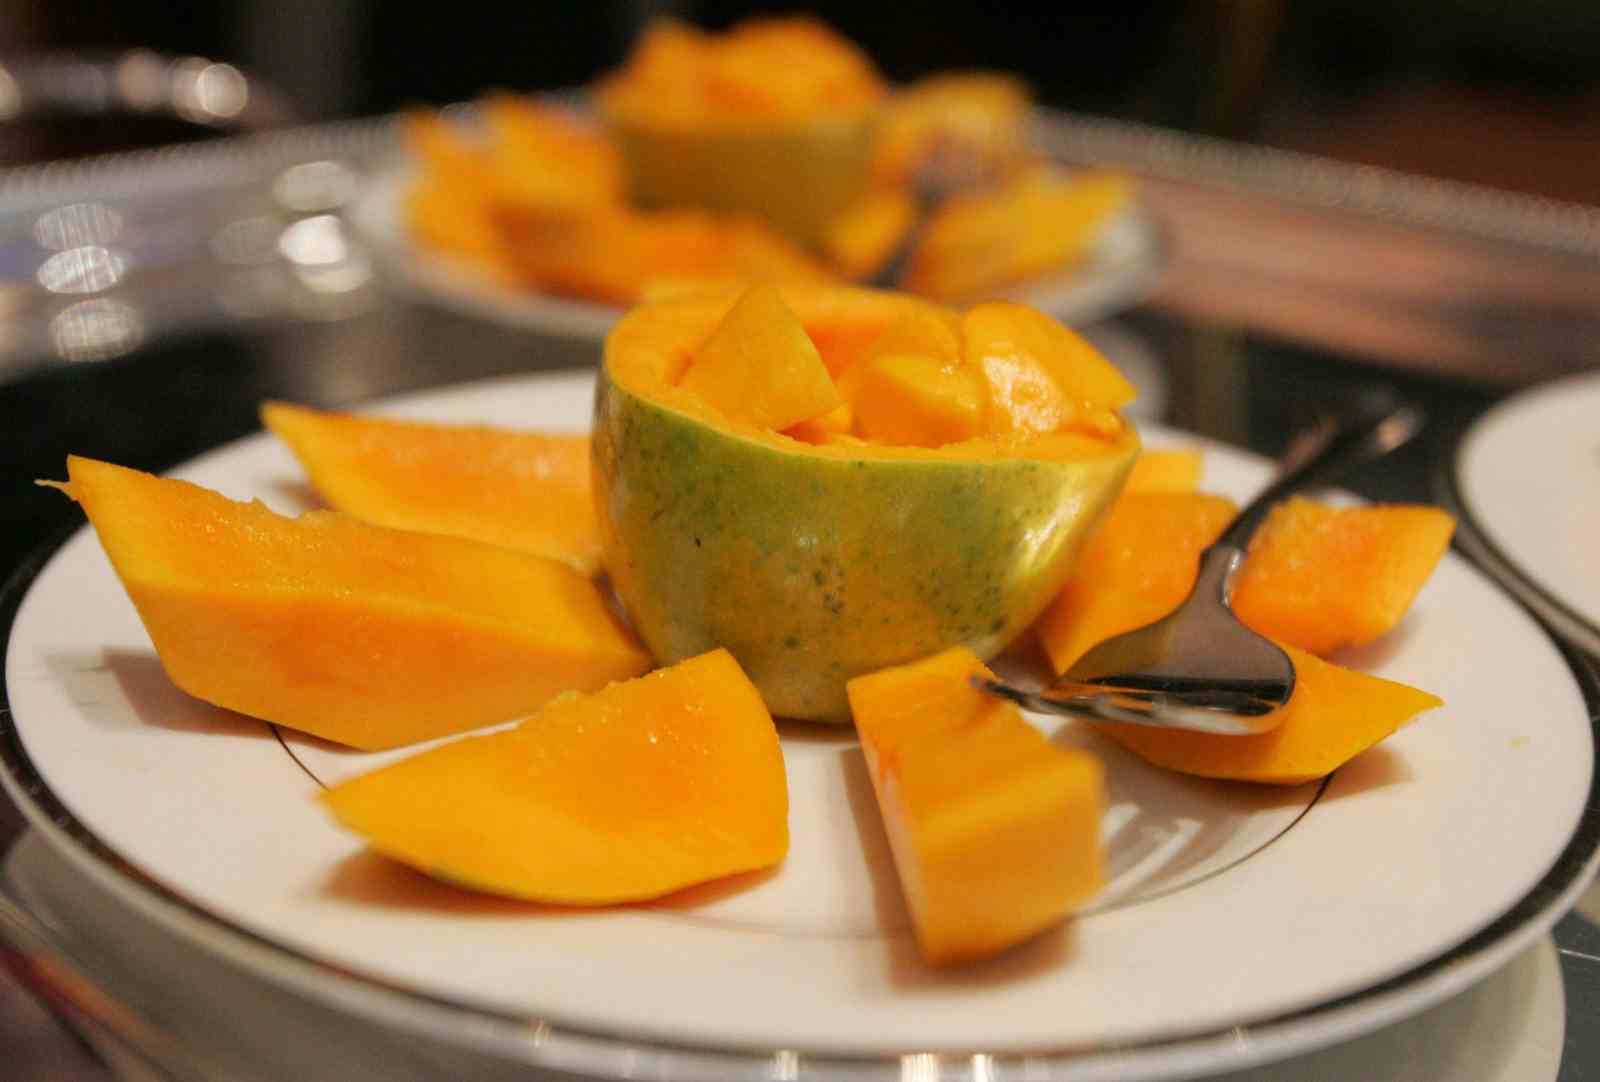 Indian mangoes await a ceremony celebrating the opening of mango trade between the U.S. and India at the Commerce Department in Washington, May 1, 2007 (SAUL LOEB/AFP via Getty Images)